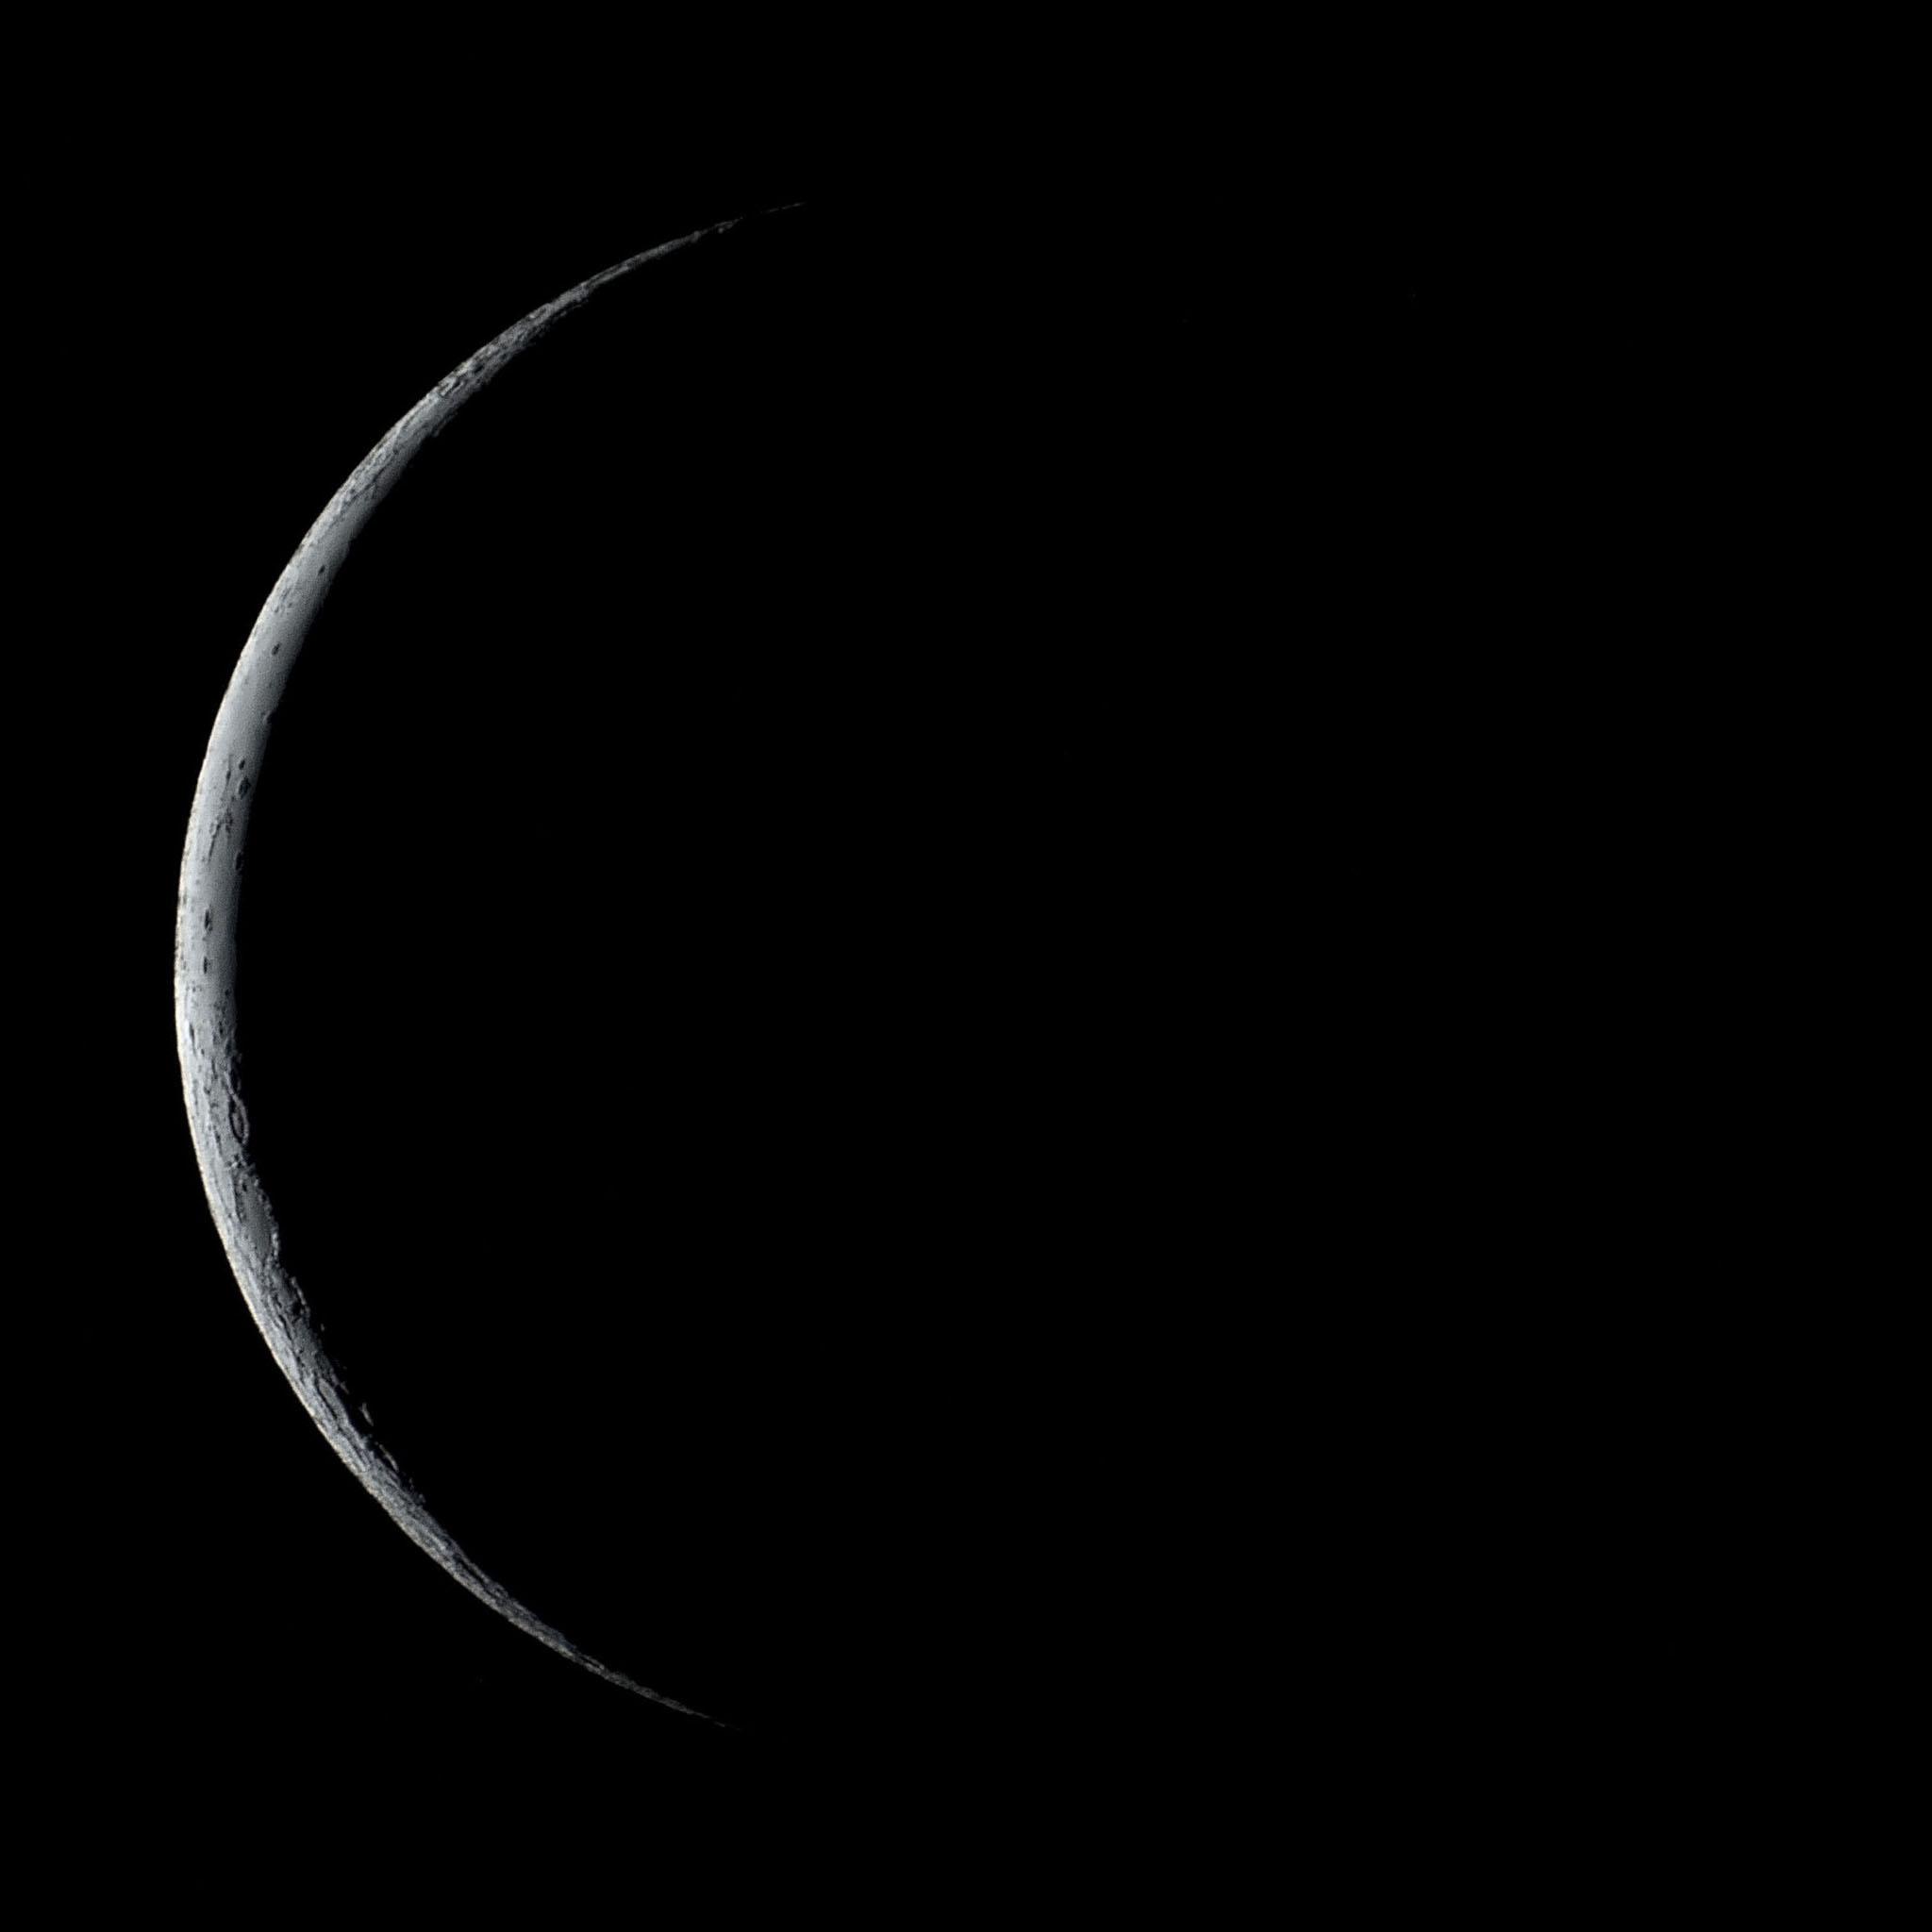 Moon Thin Waning Crescent 140823 not so bad Astrophotography